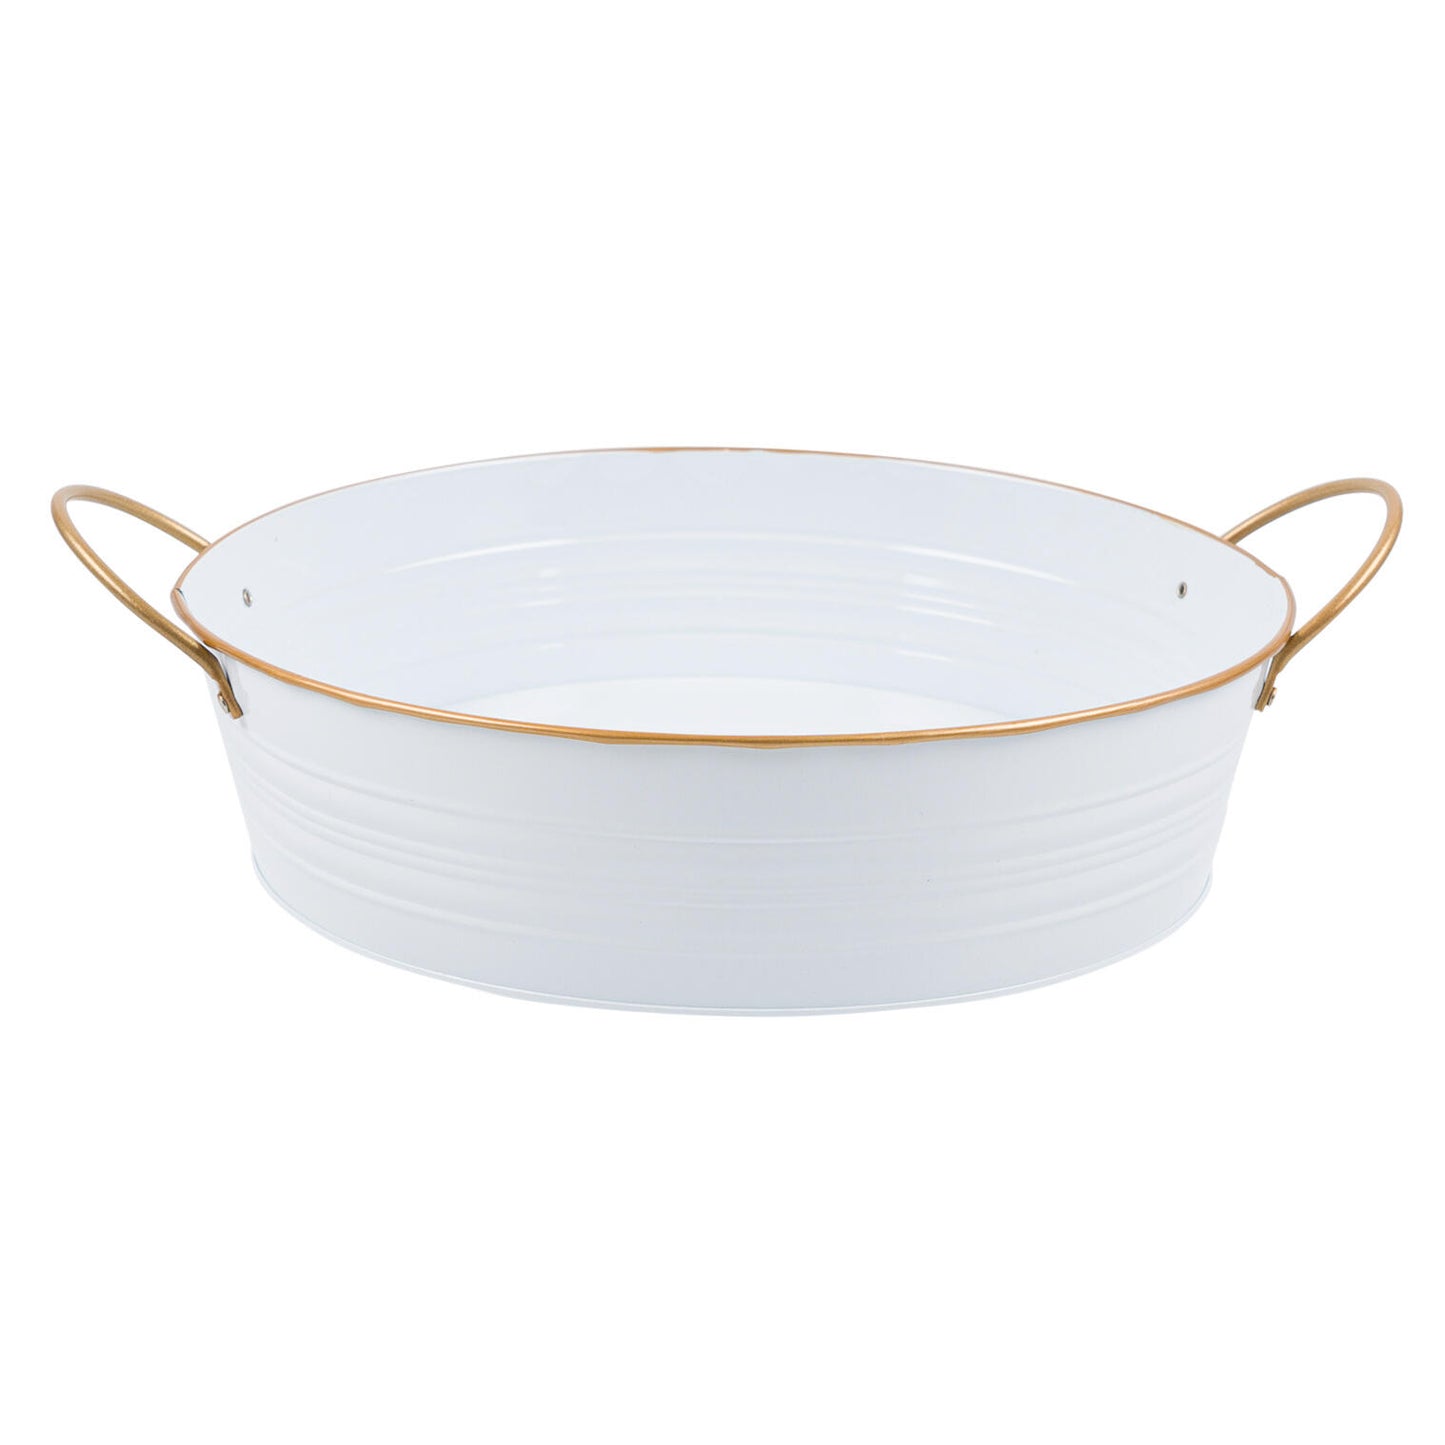 13” Round White Ice Tray with Gold Rim & Handle